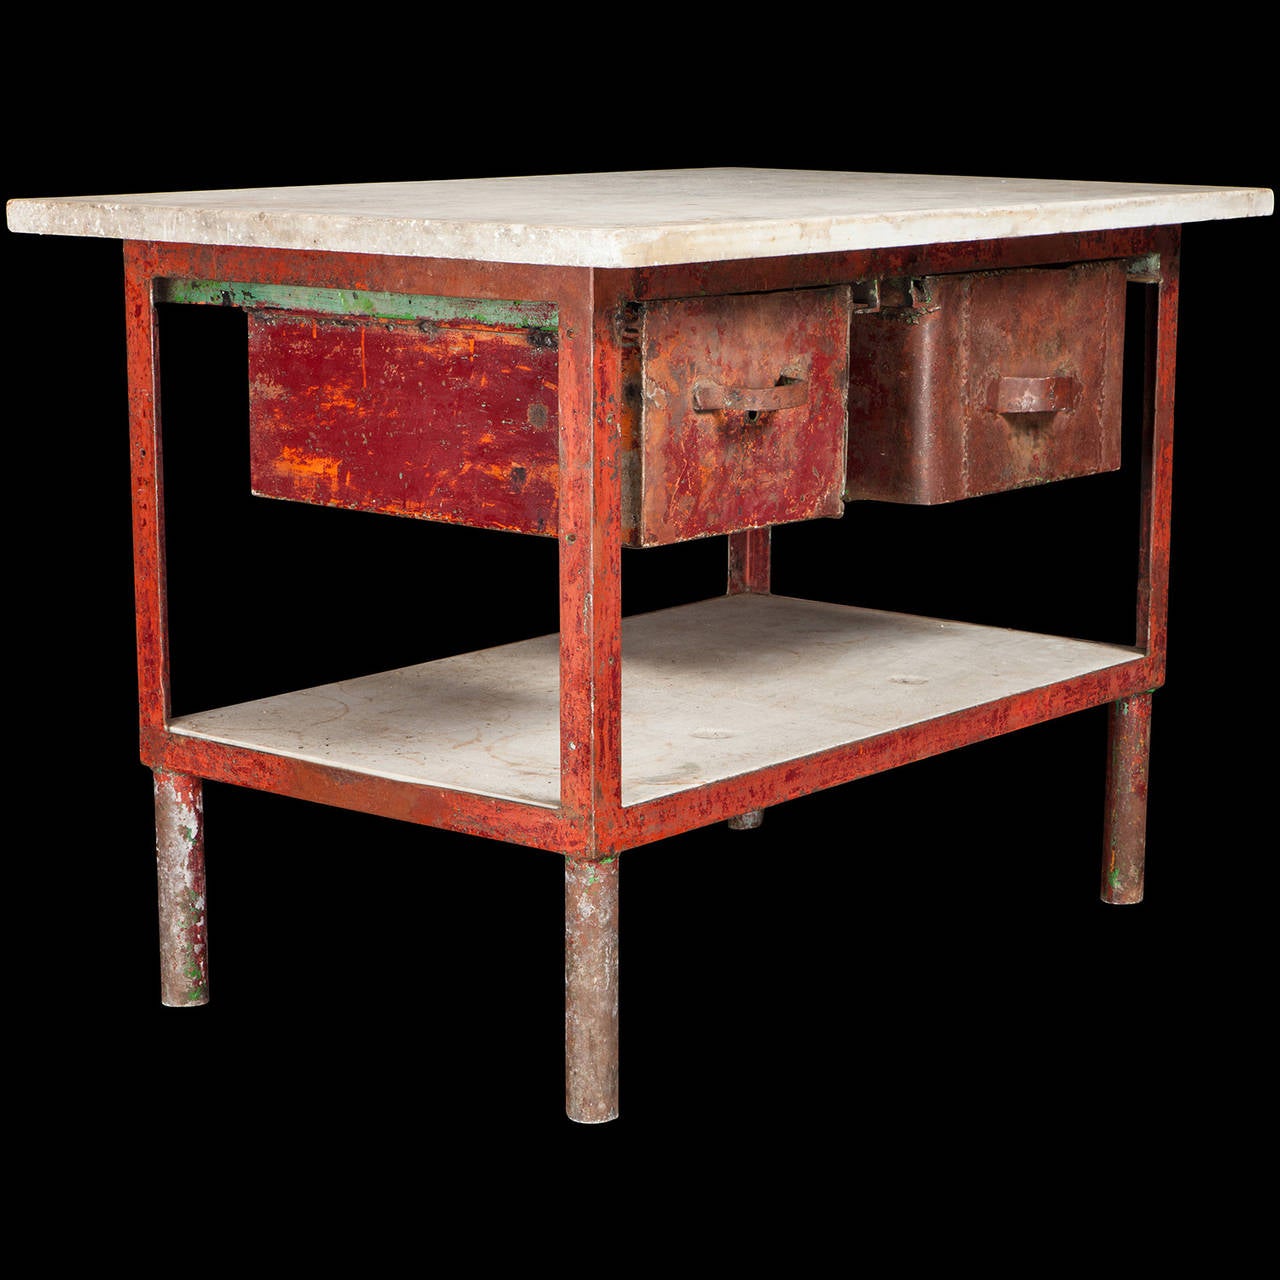 Painted Iron and Marble Work Table